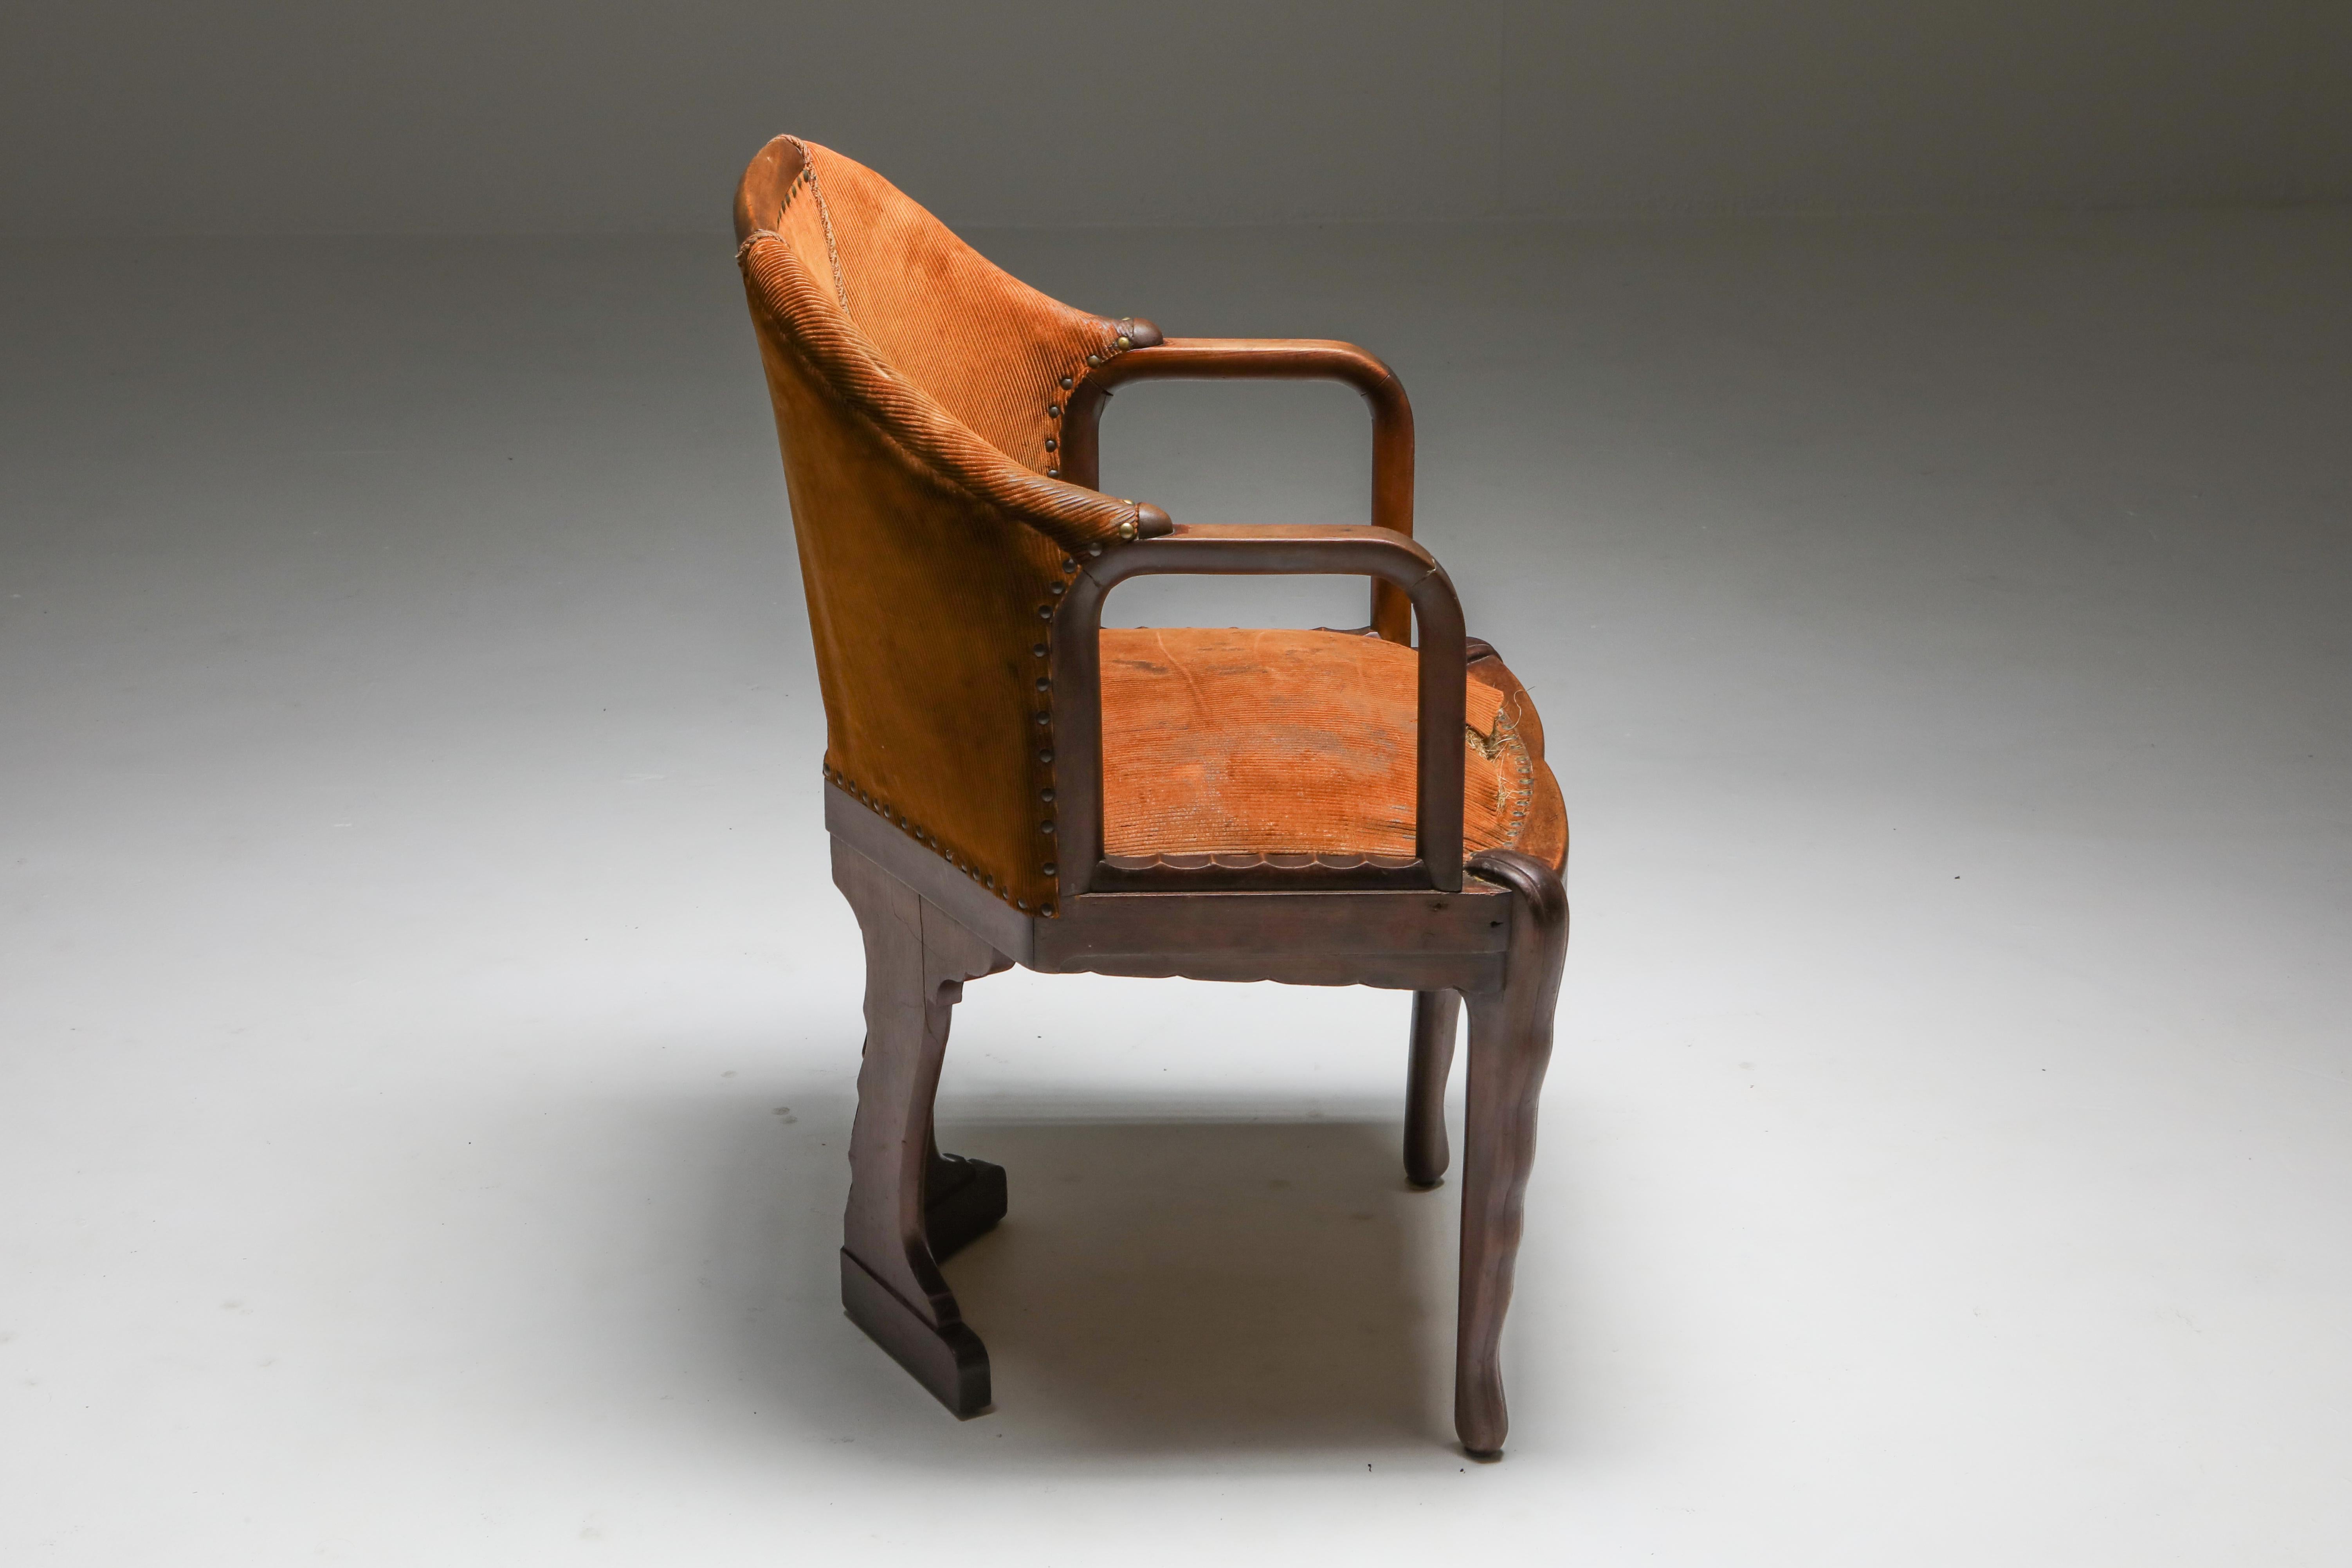 Expressionist Amsterdam School Chair 't Woonhuys